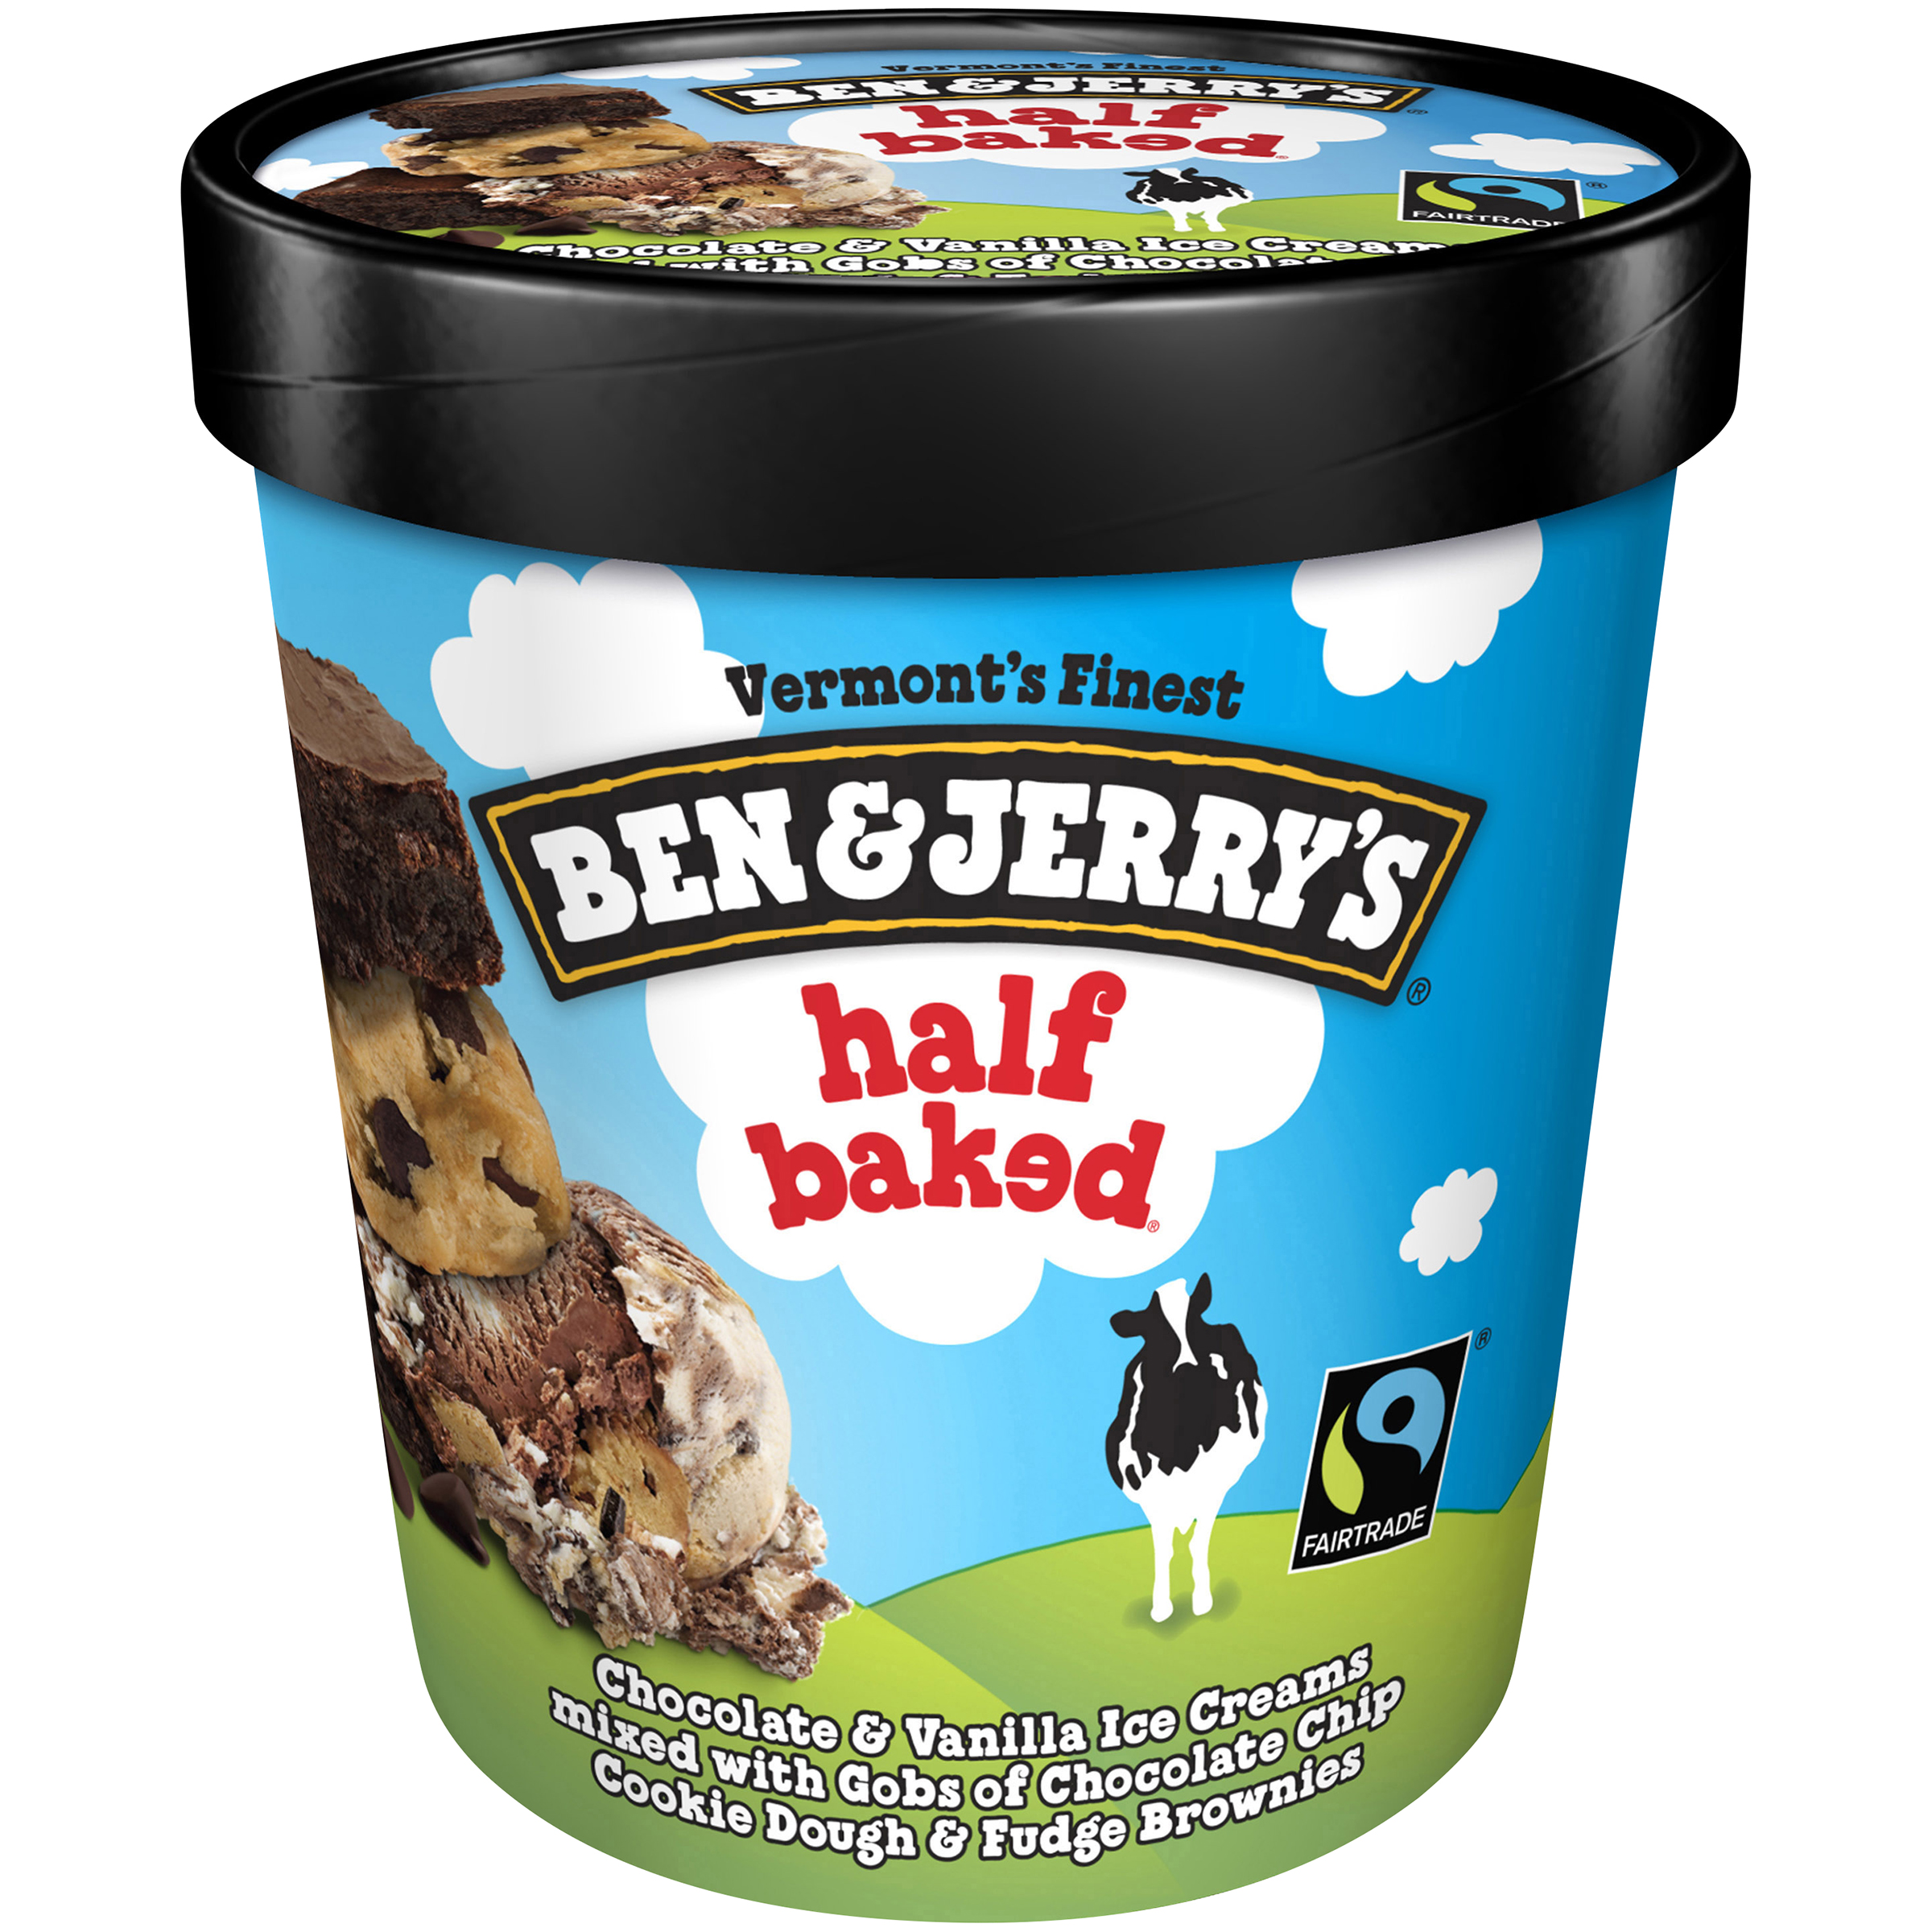 Ben & Jerry's Half Baked Ice Cream, 2 Twisted, Chocolate Fudge Brownie meets Chocolate Chip Cookie Dough, 16 oz (1pt) 473 ml